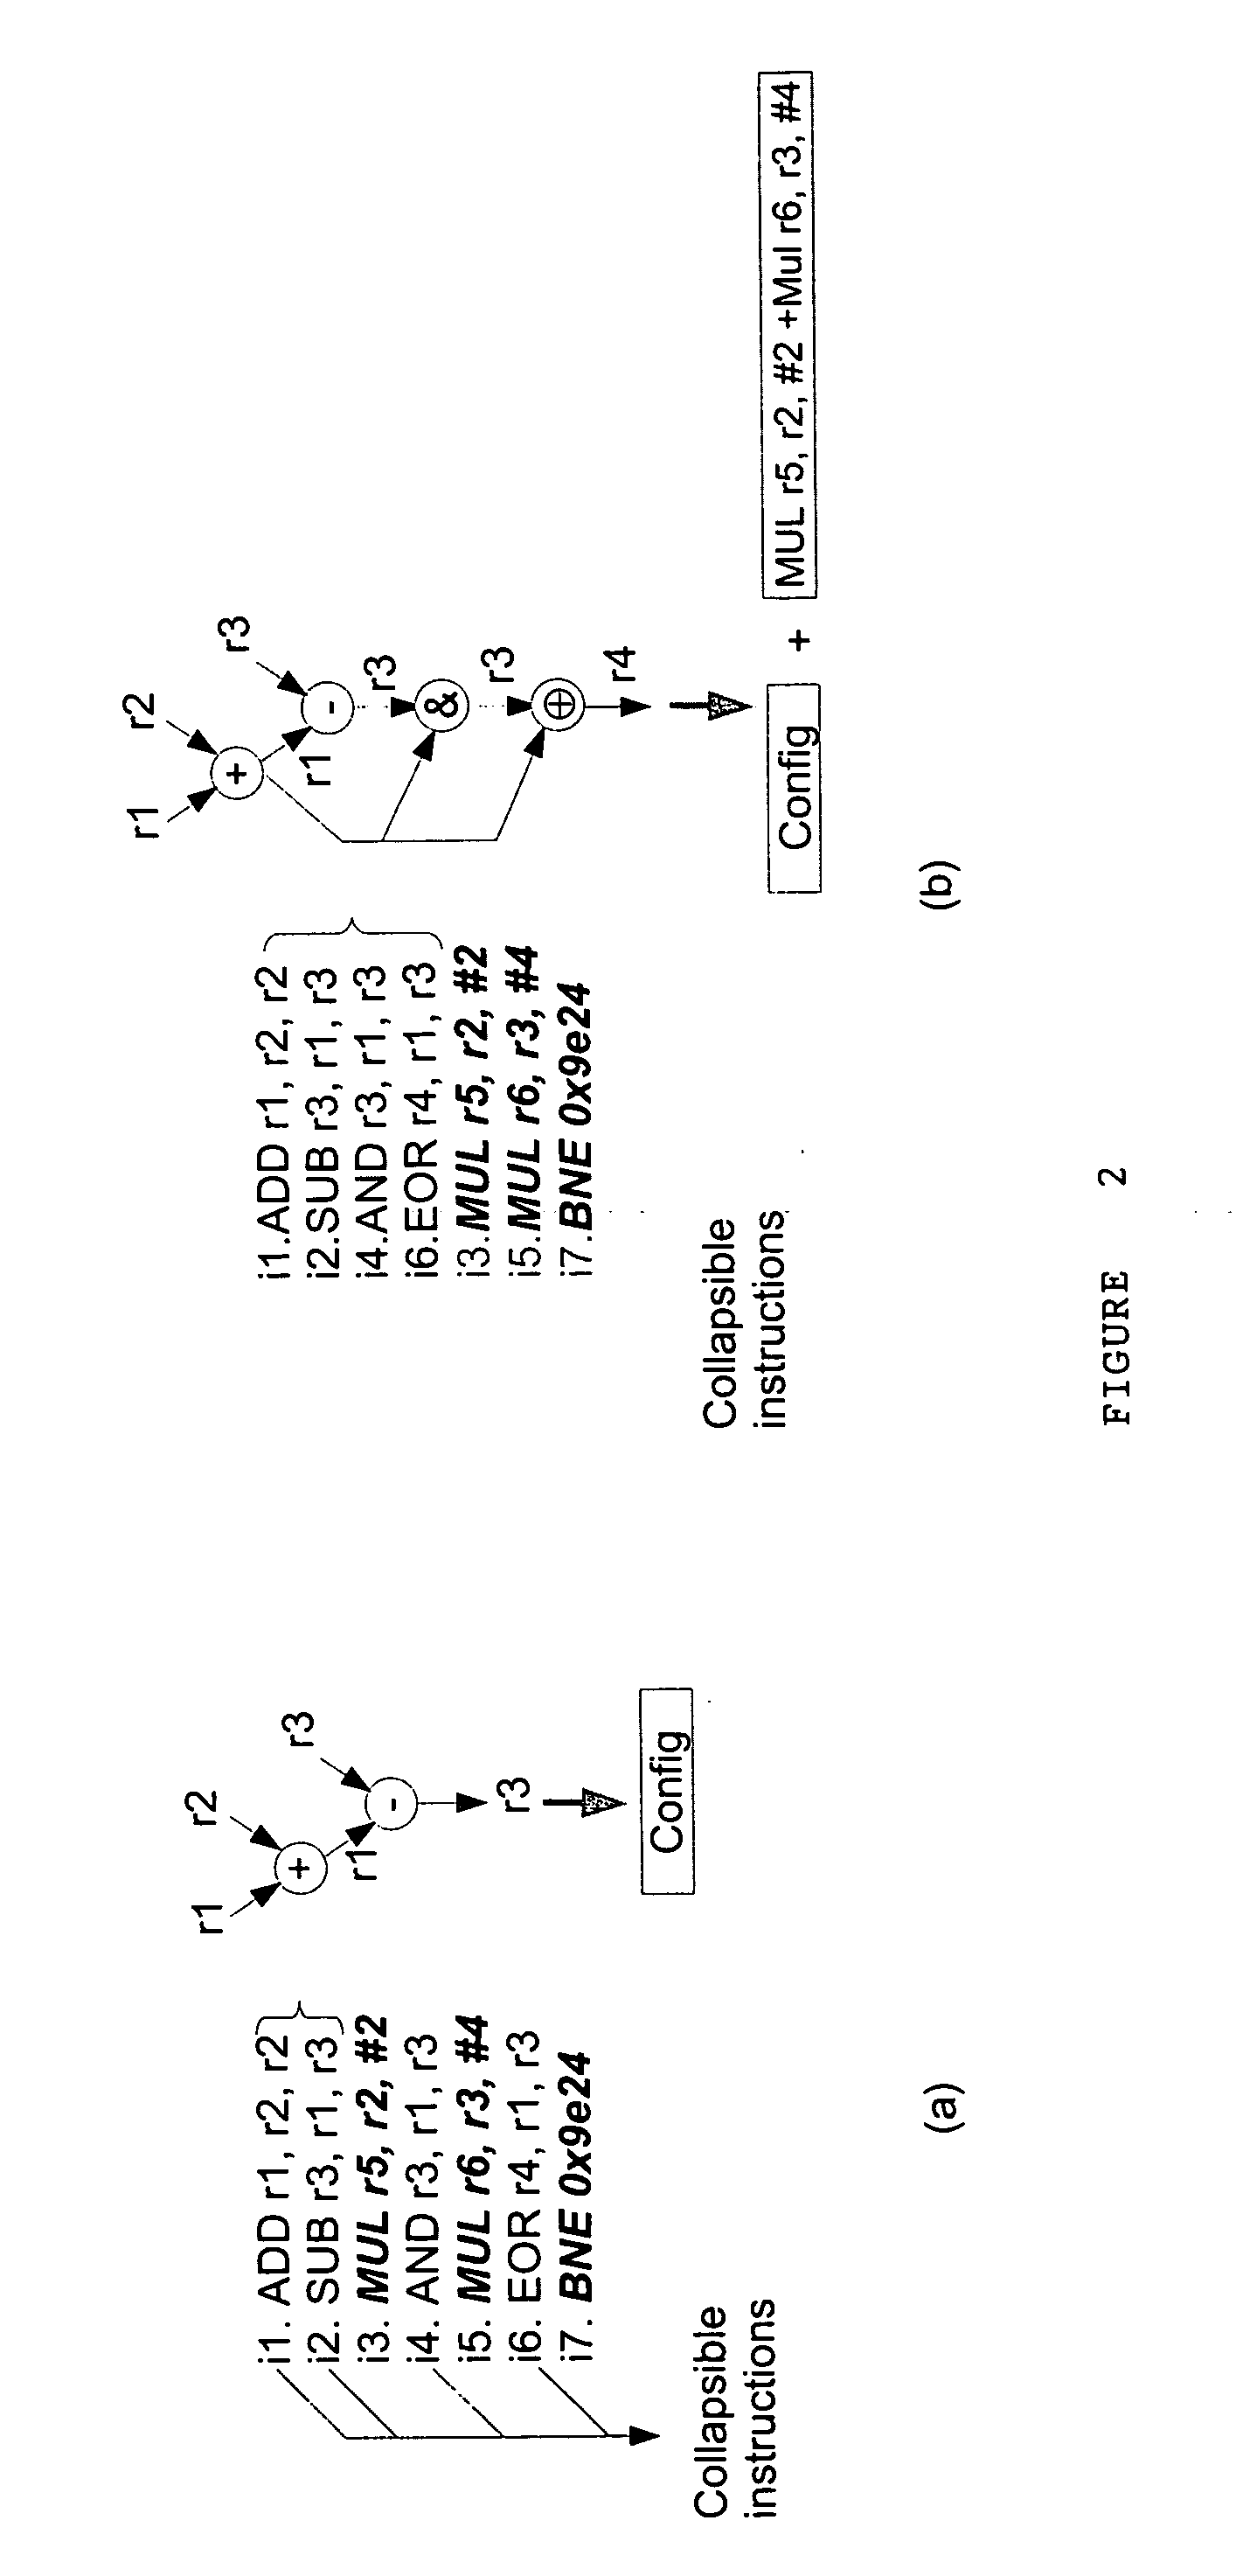 Instruction subgraph identification for a configurable accelerator